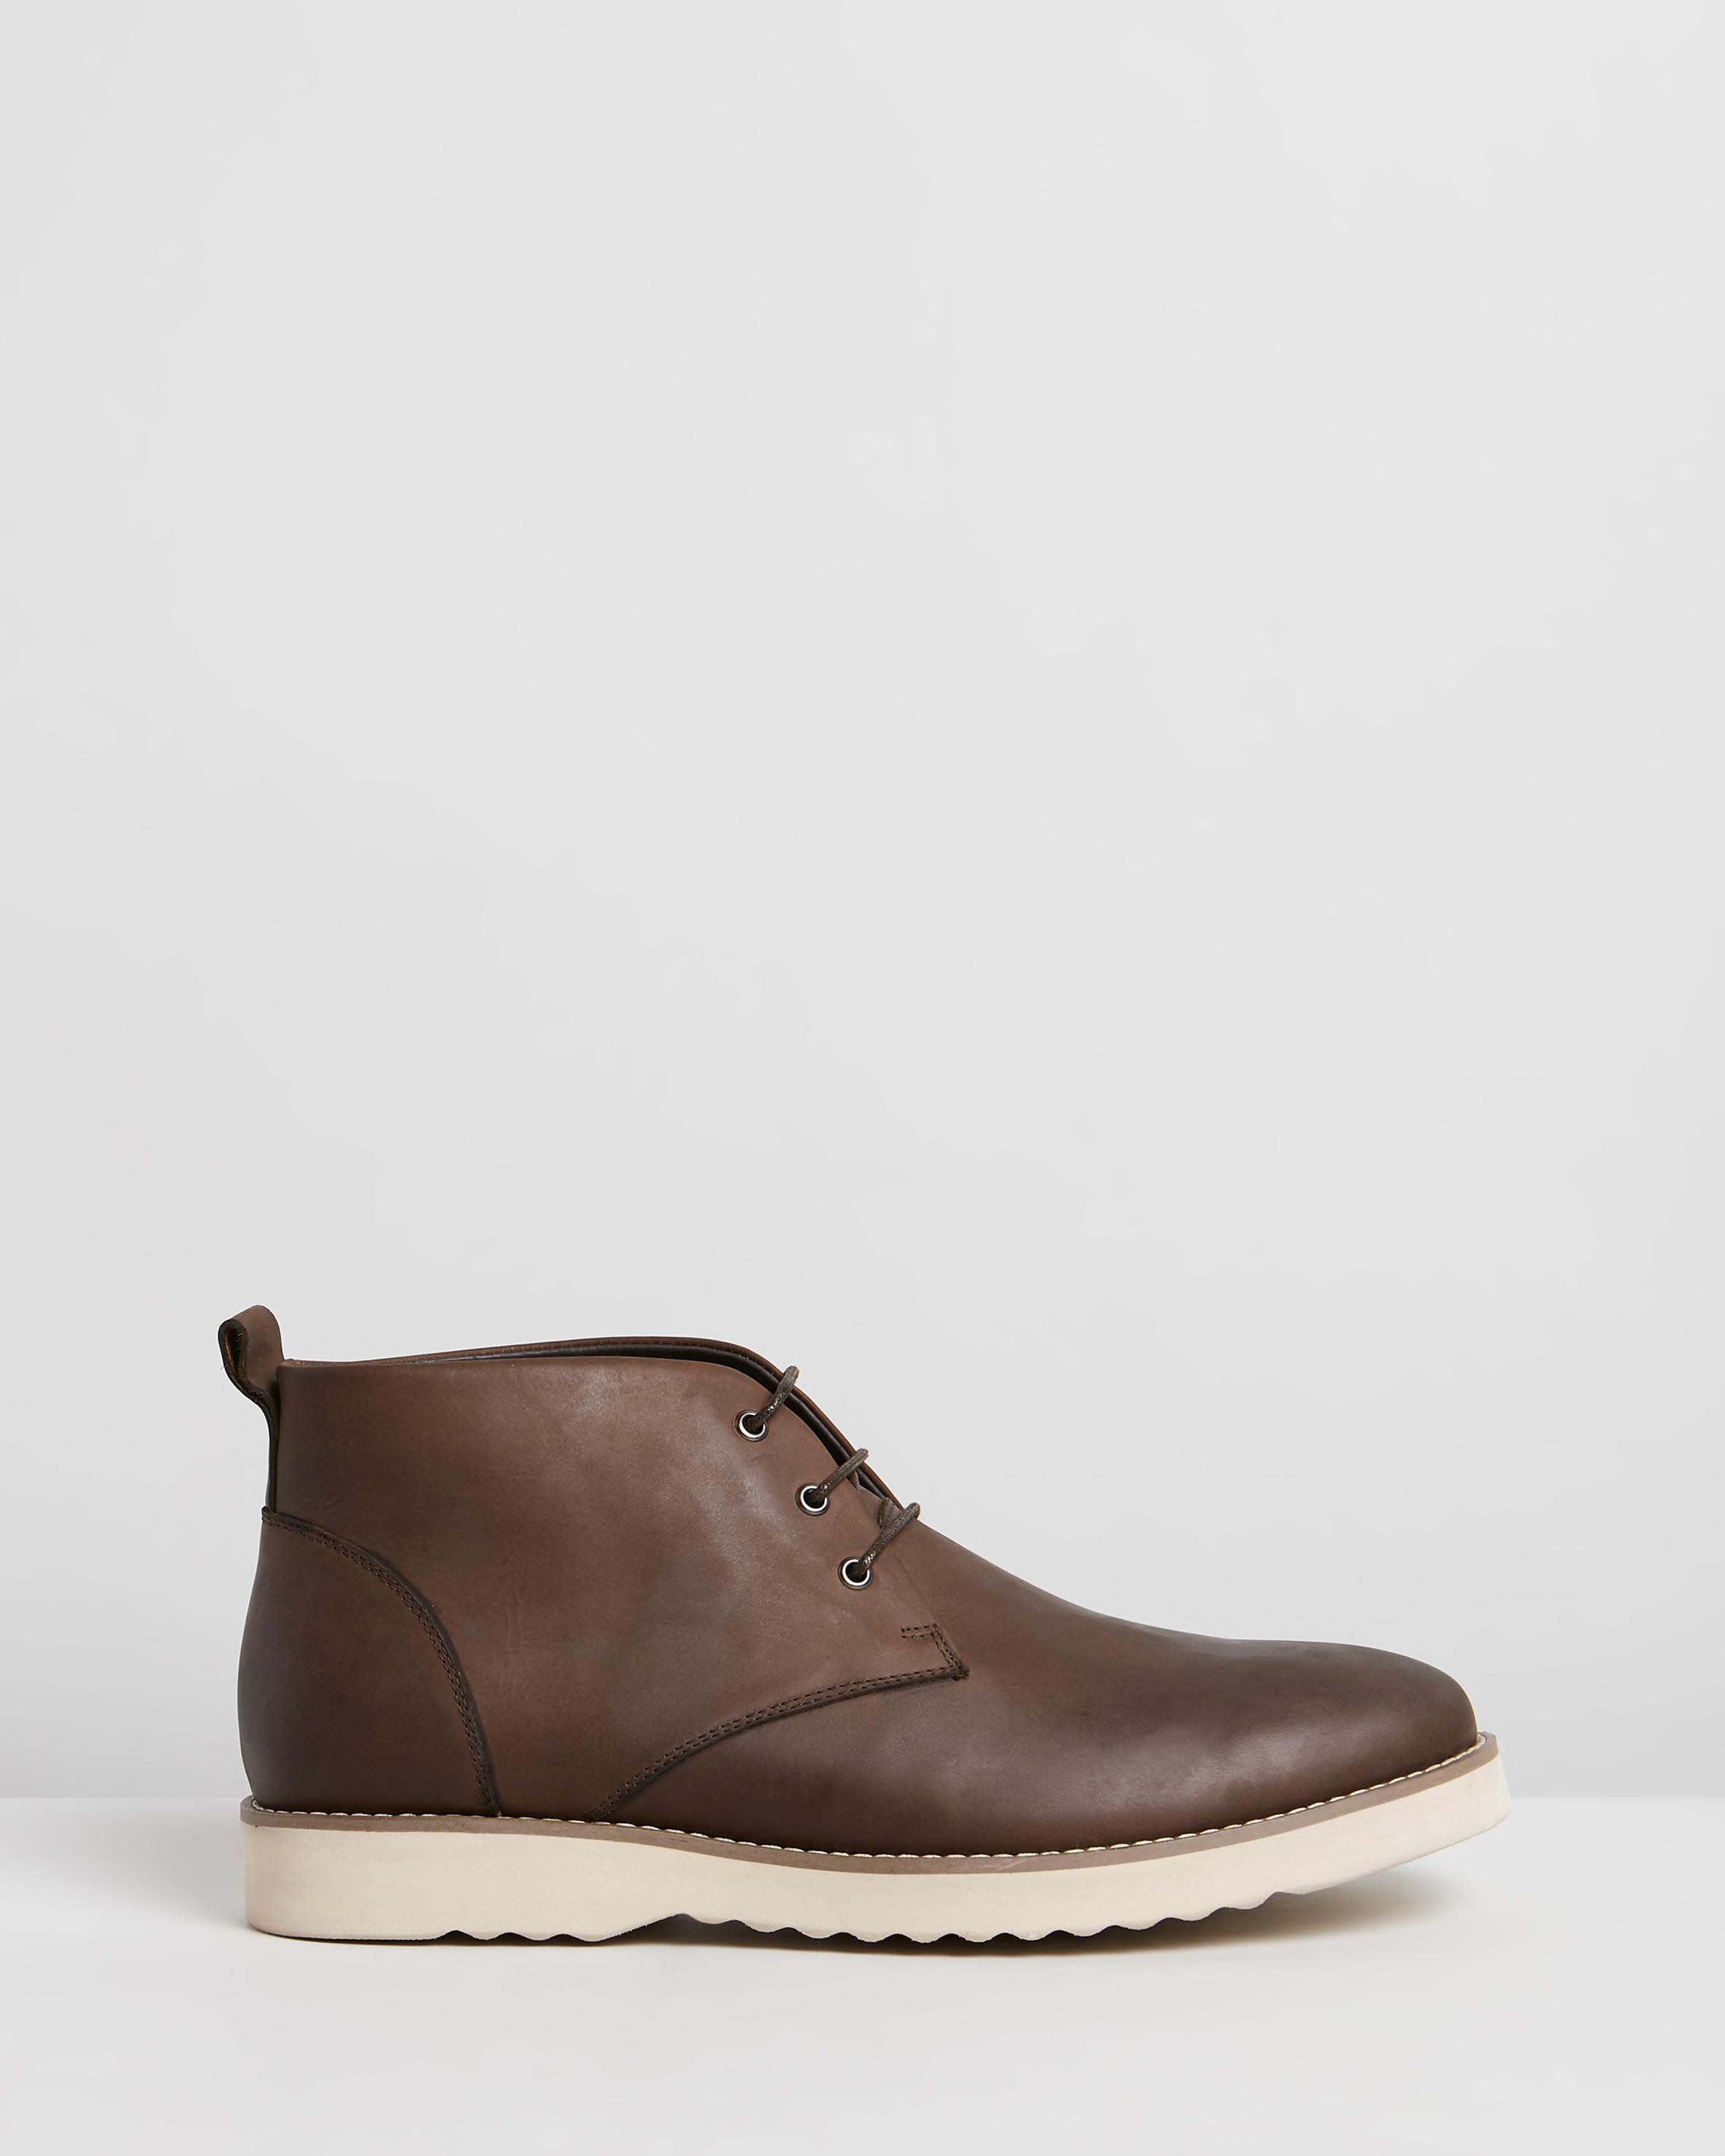 Maitland Leather Chukka Boots Brown by Double Oak Mills | ShoeSales